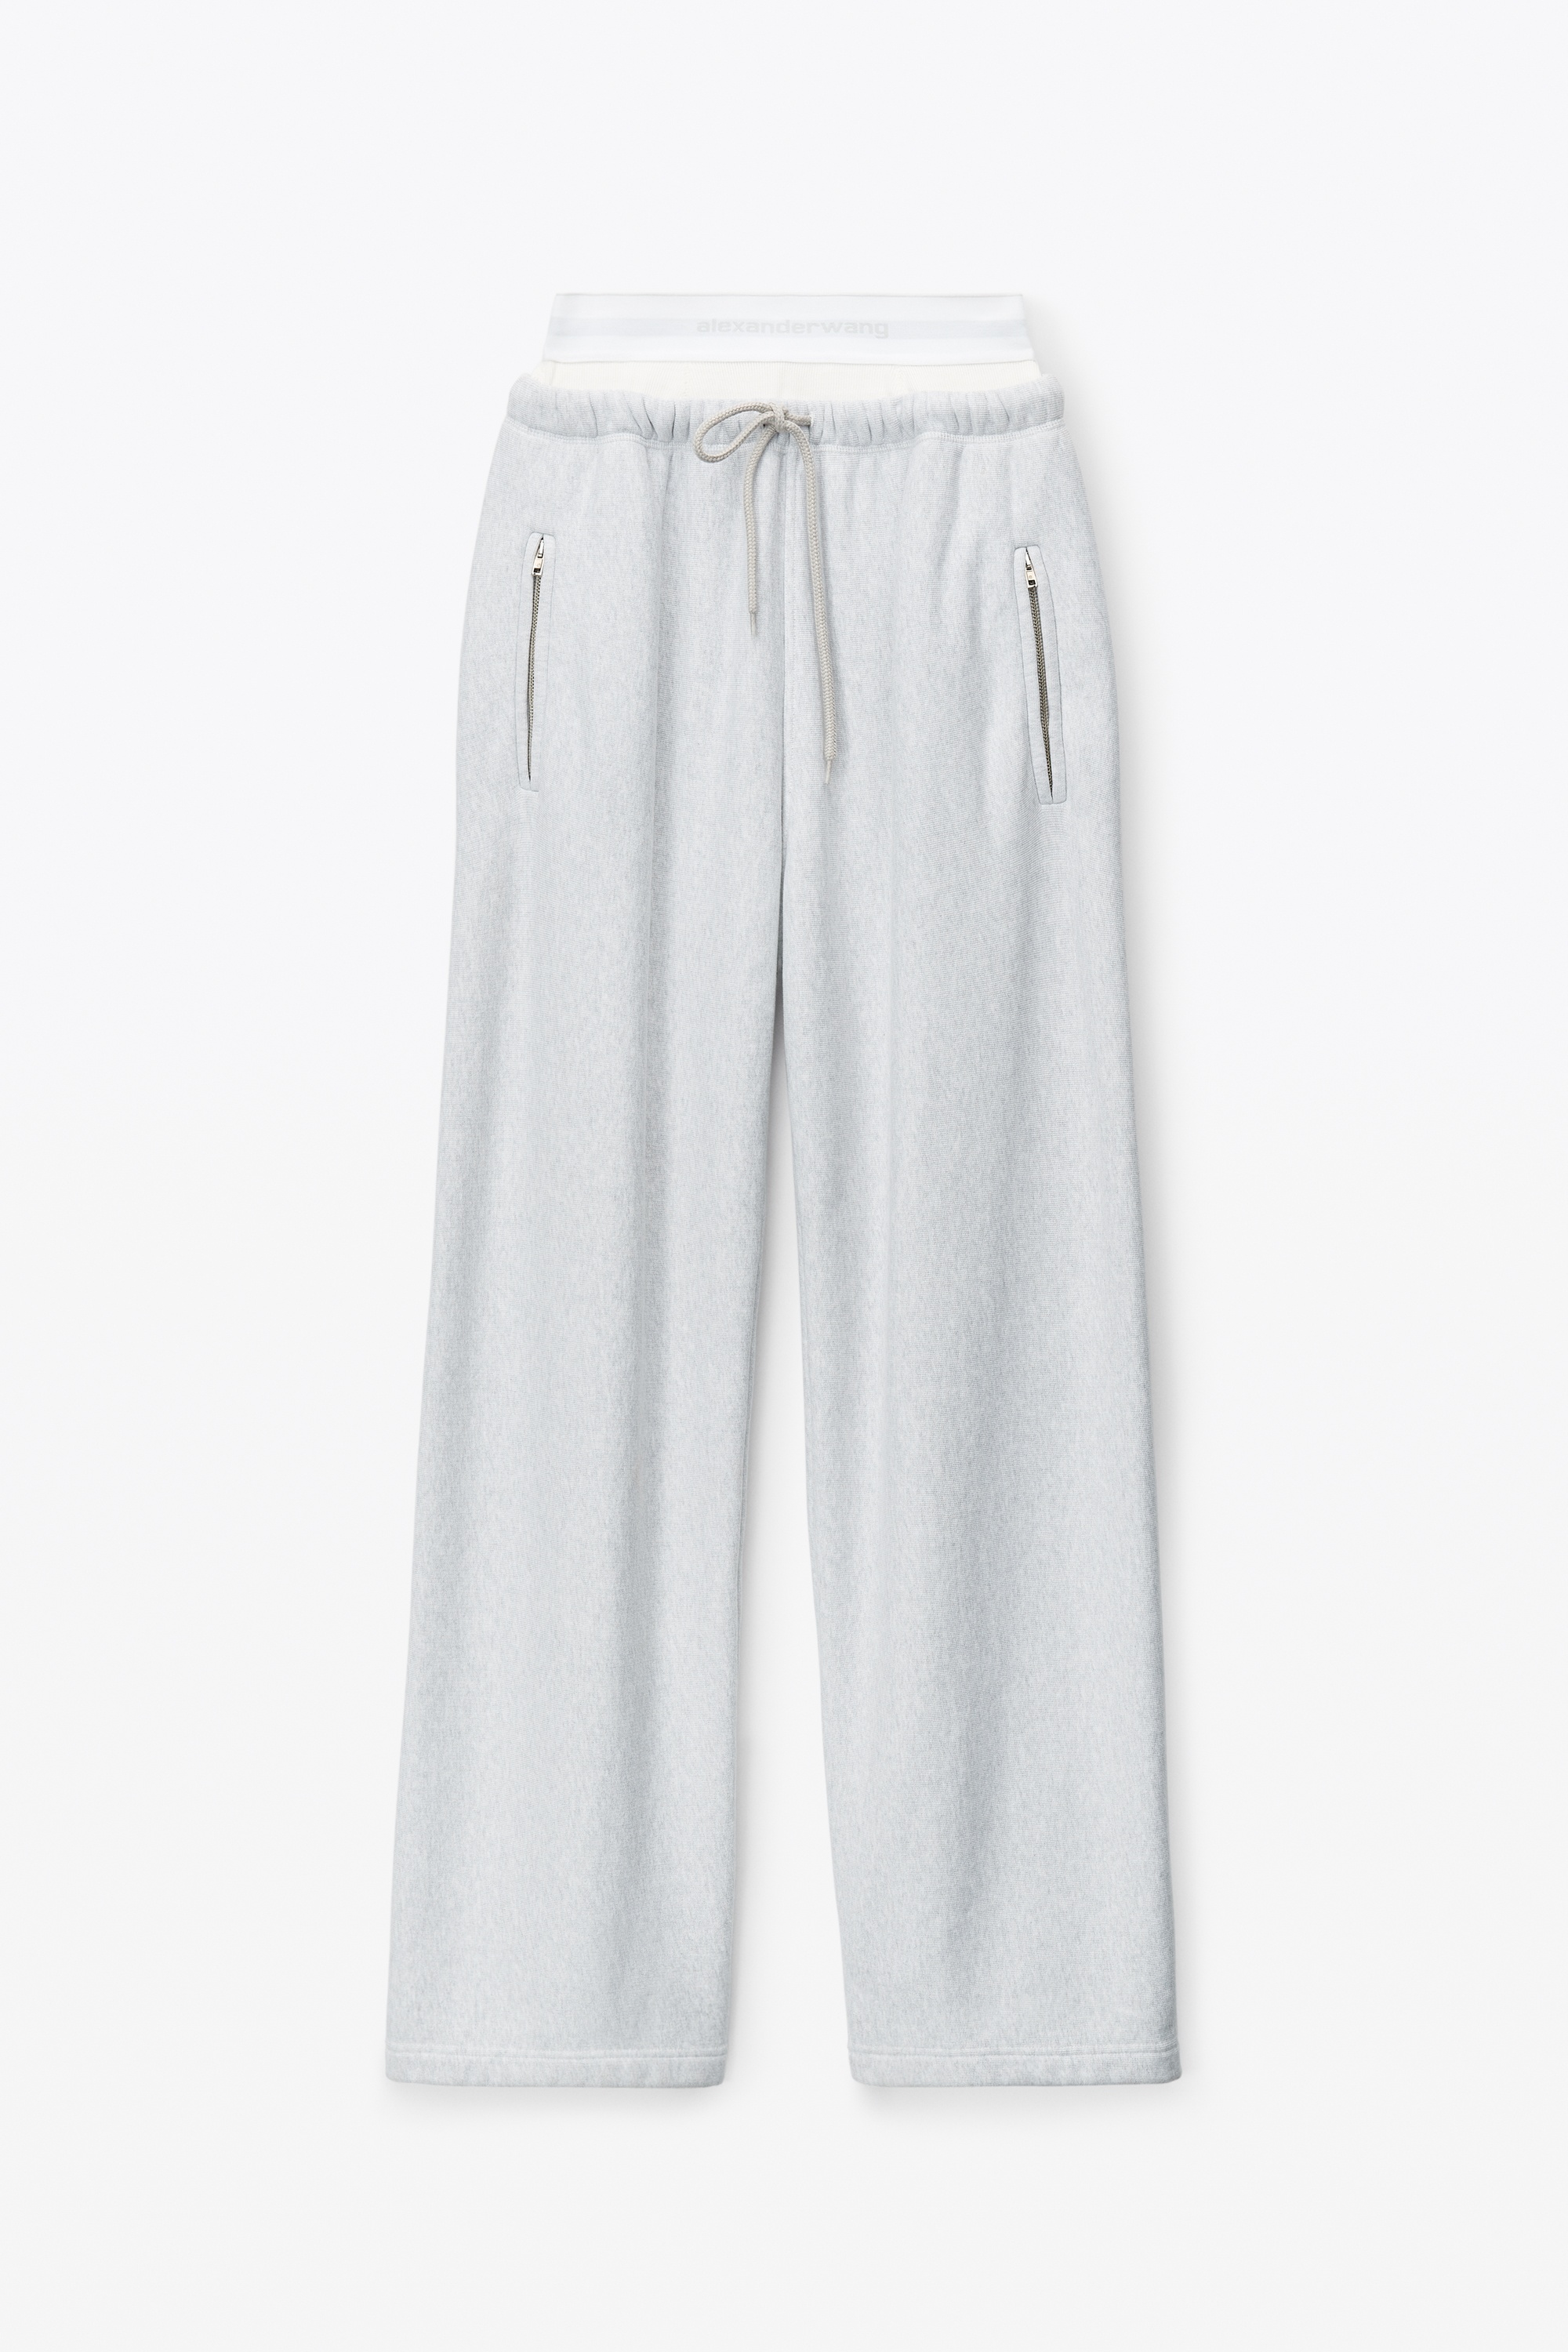 wide leg sweatpants with pre-styled logo brief waistband - 1